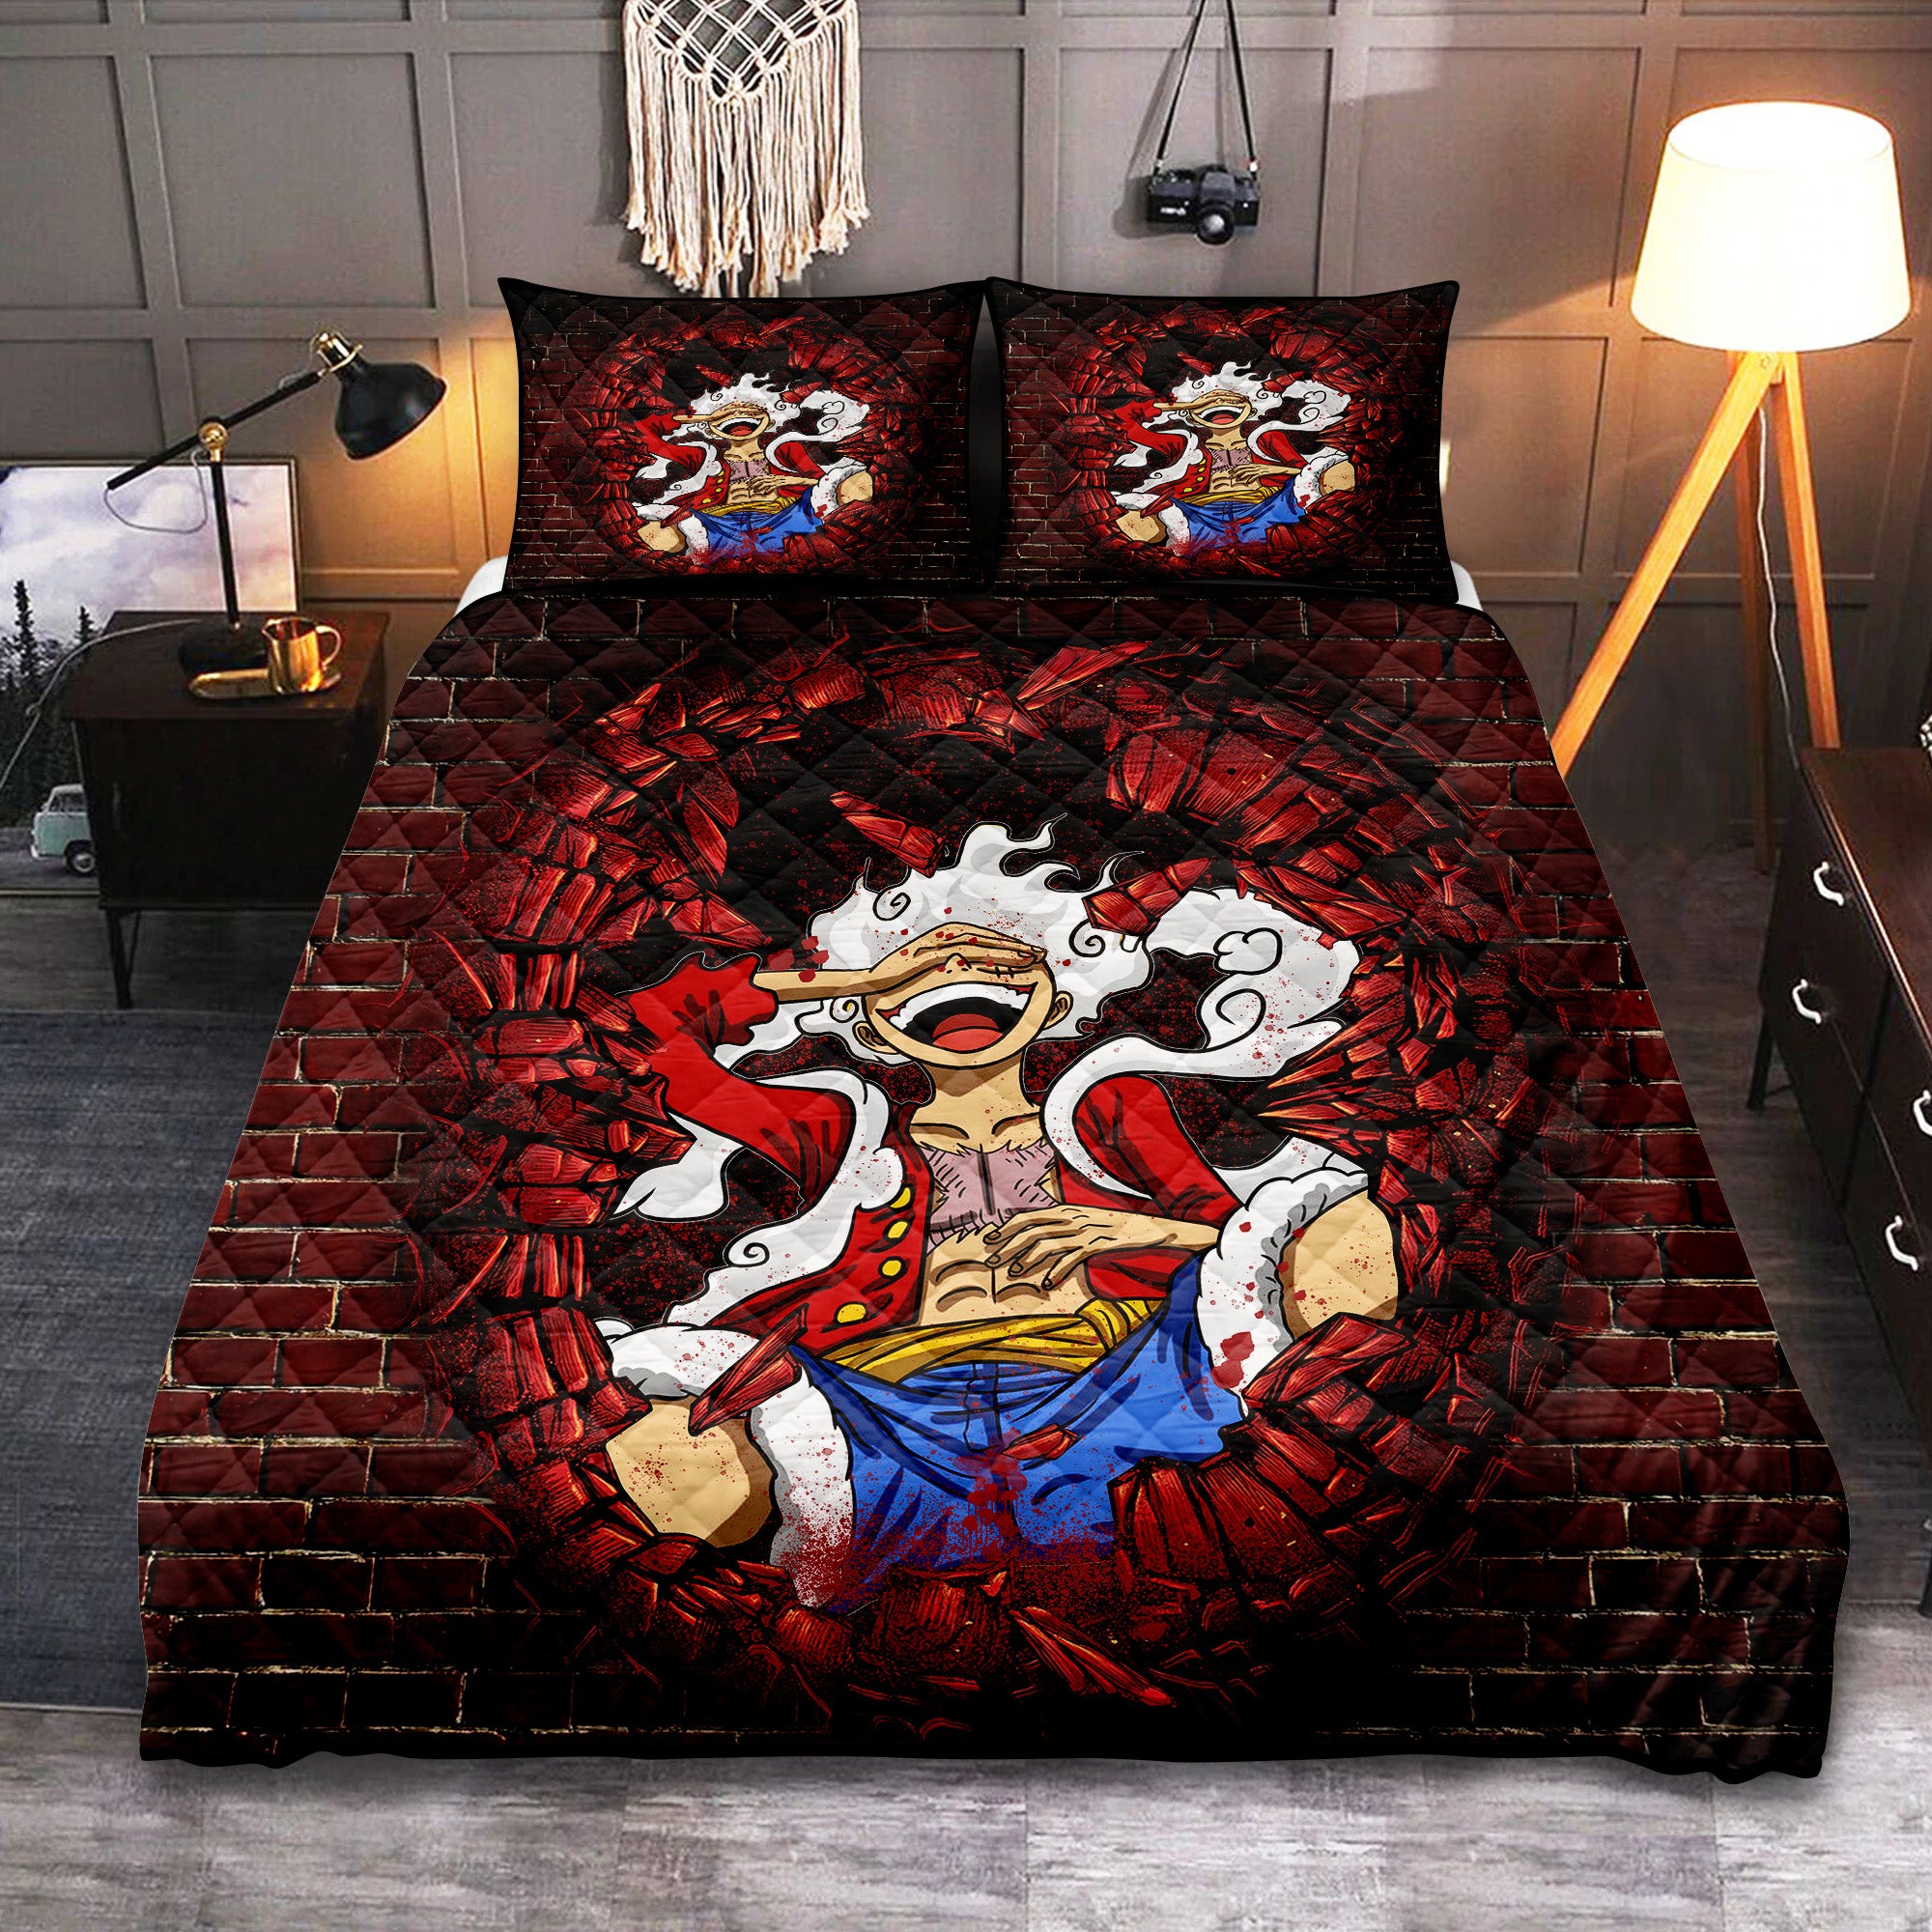 Luffy Gear 5 One Piece Anime Quilt Bed Sets Nearkii